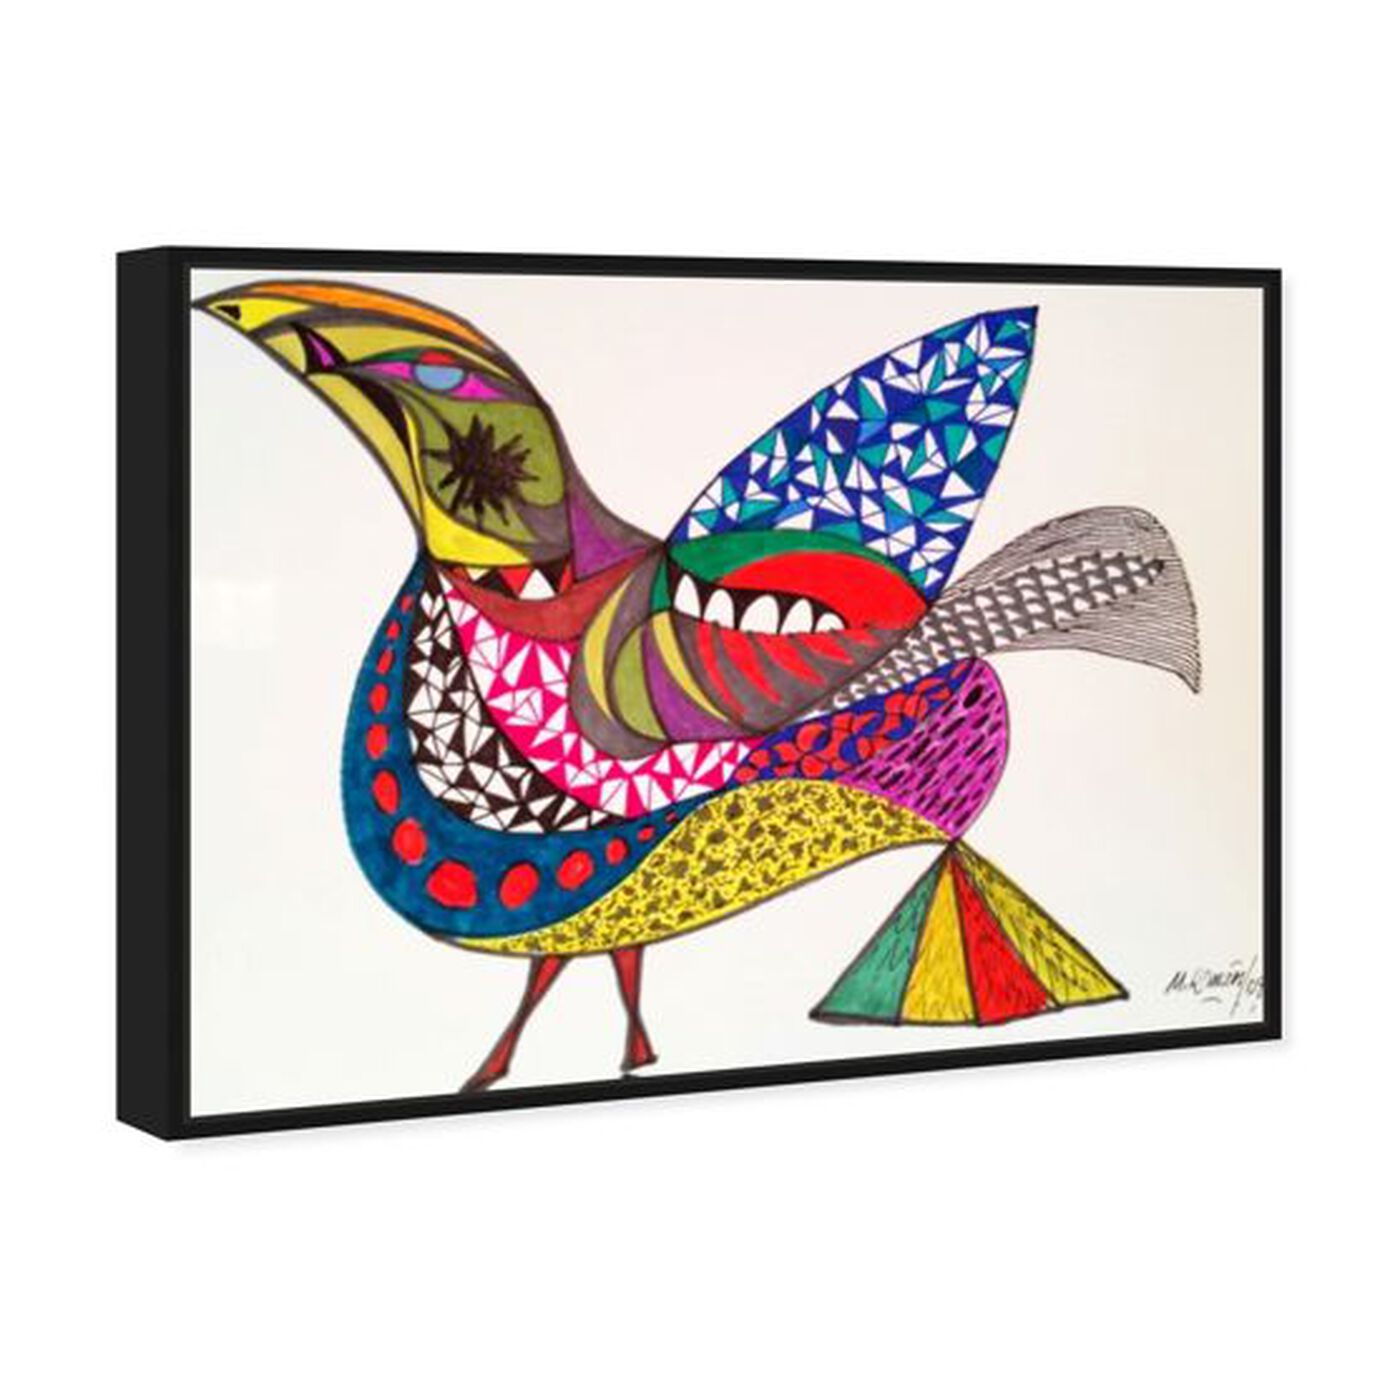 Angled view of Bird featuring animals and birds art.